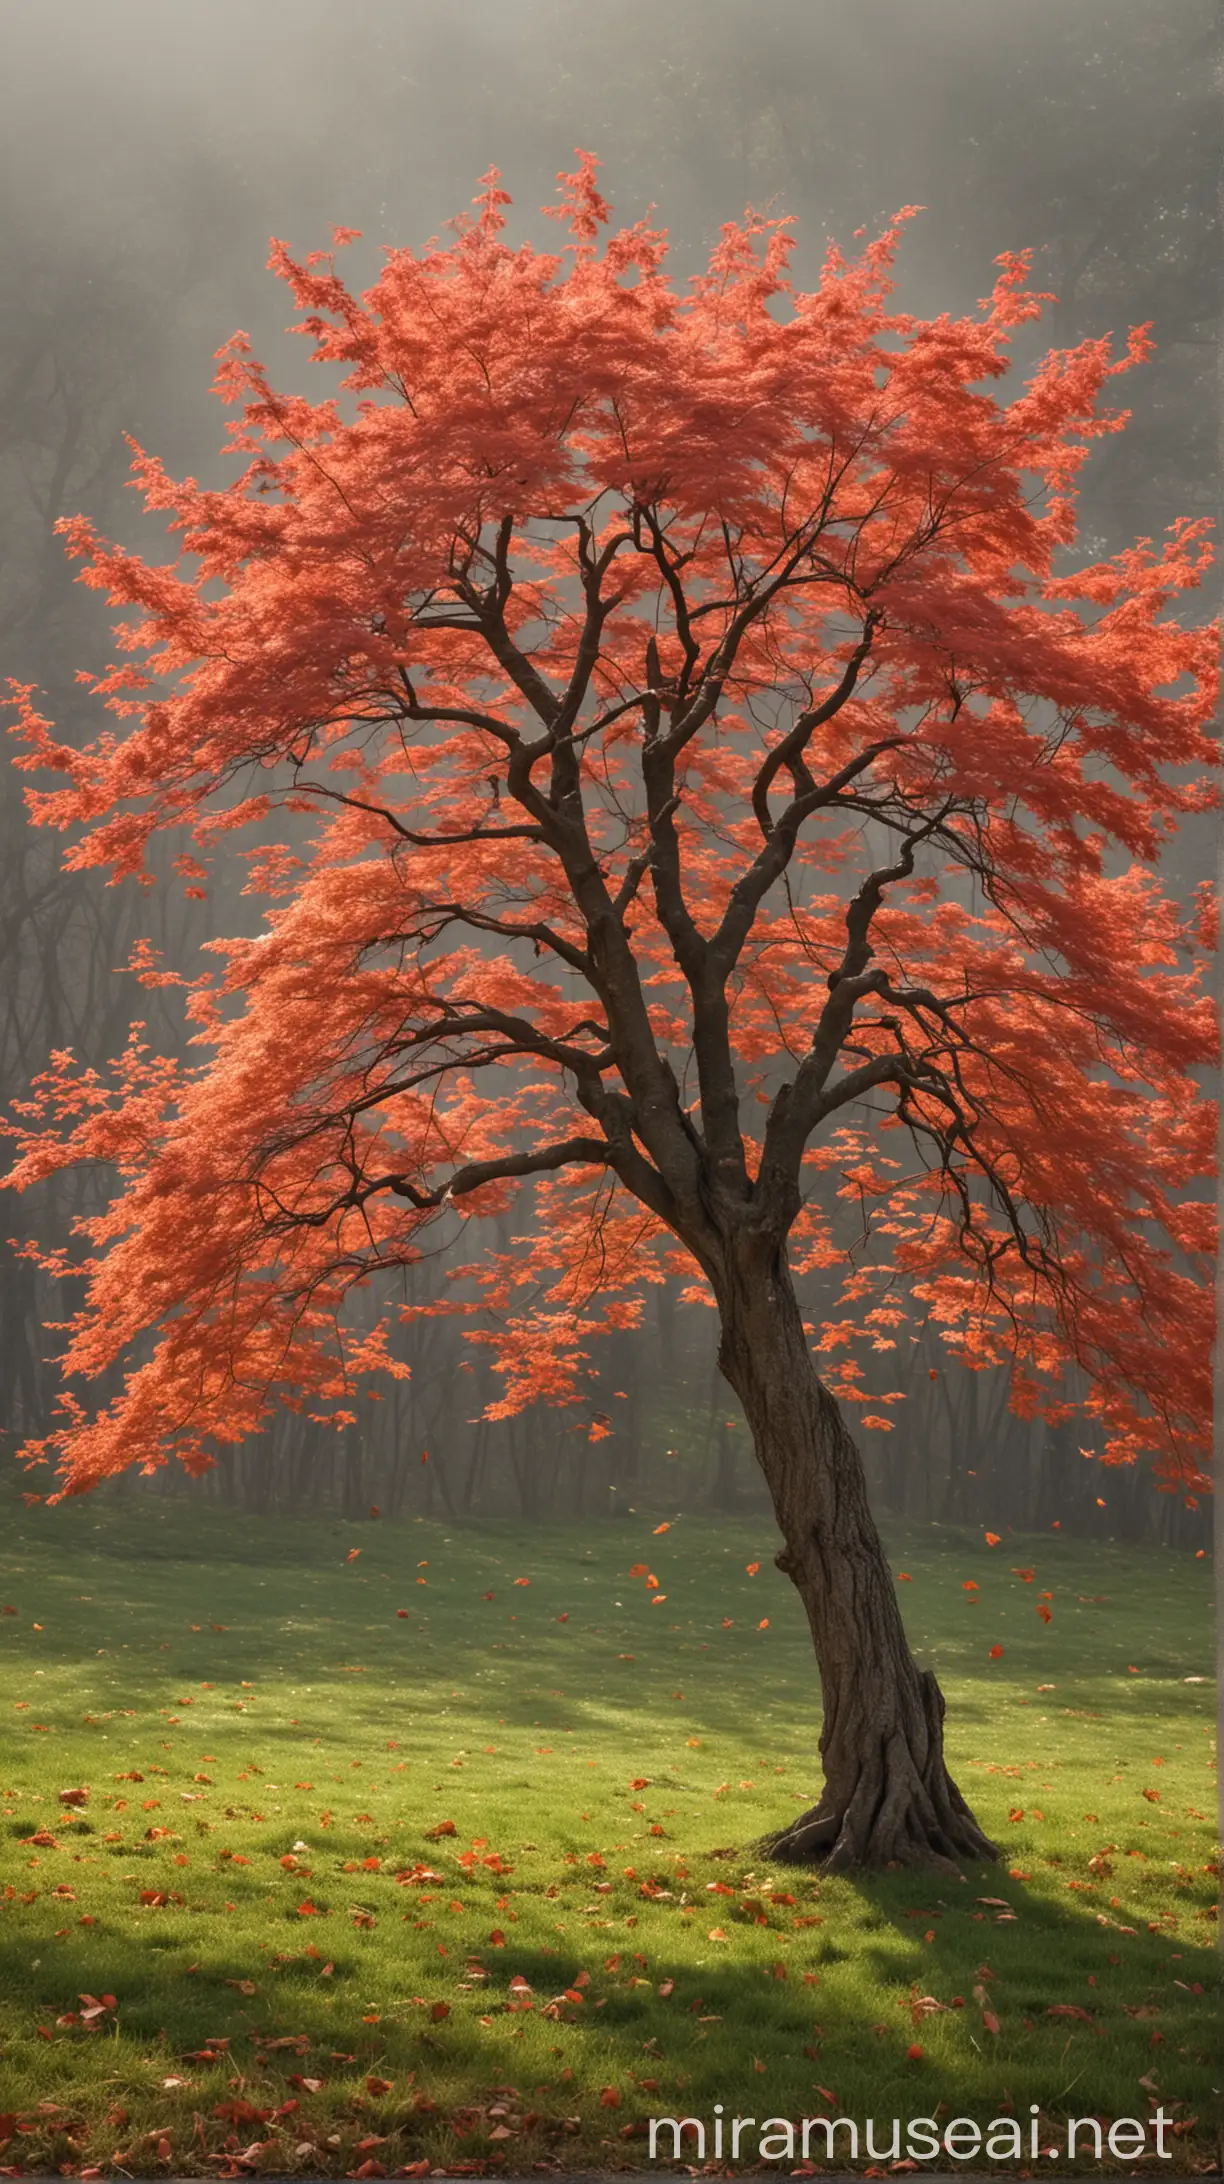 Breezy Serenity Wind Blowing Through a Majestic Maple Tree